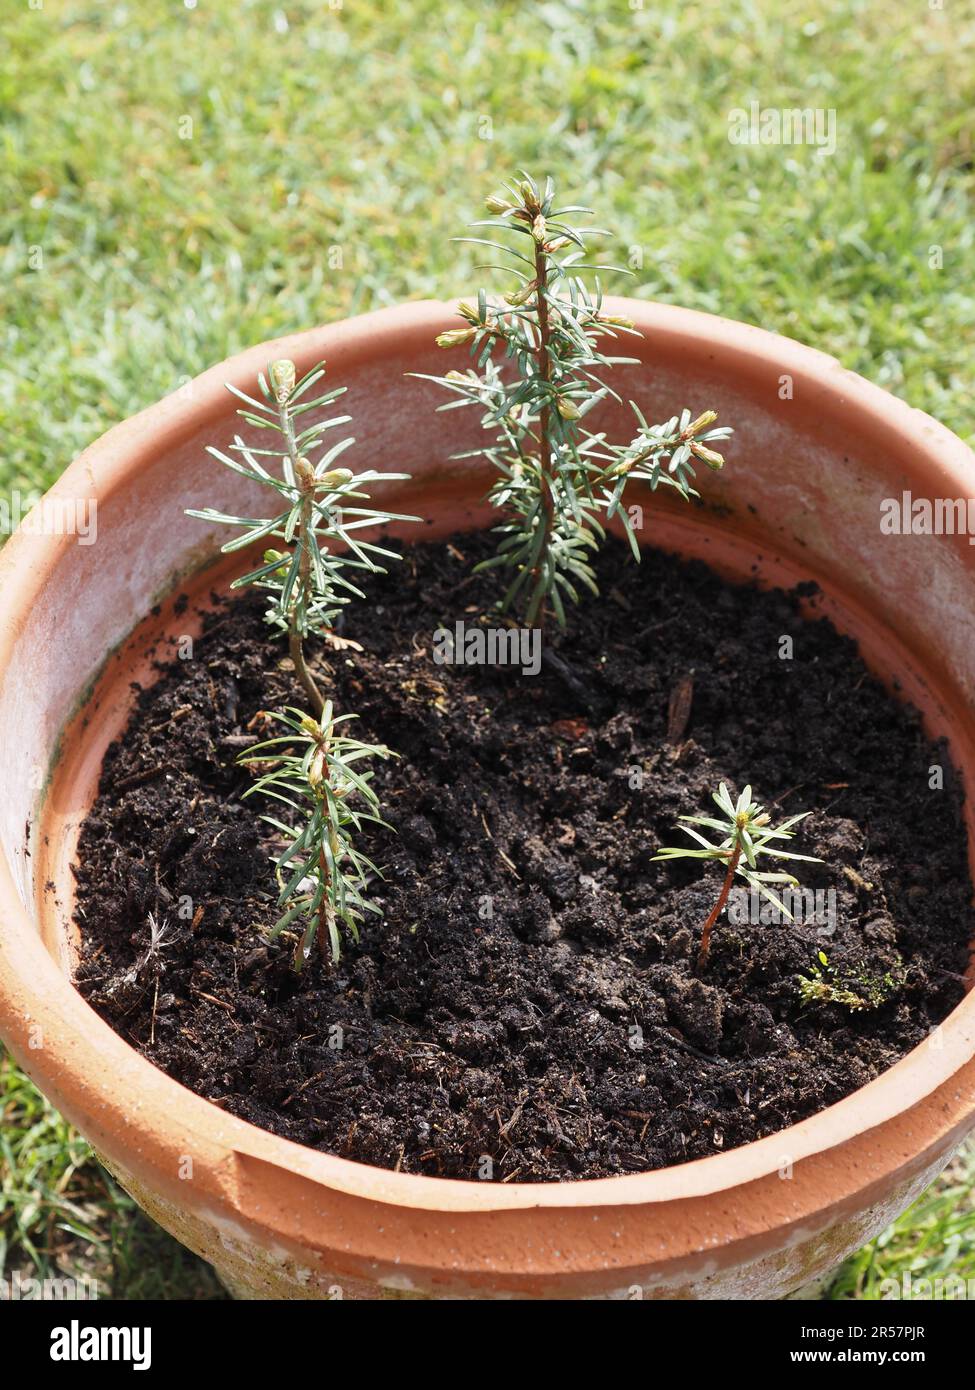 Four young Nordmann firs in a terracotta pot, growth concept, environment and conservation, beauty of nature Stock Photo